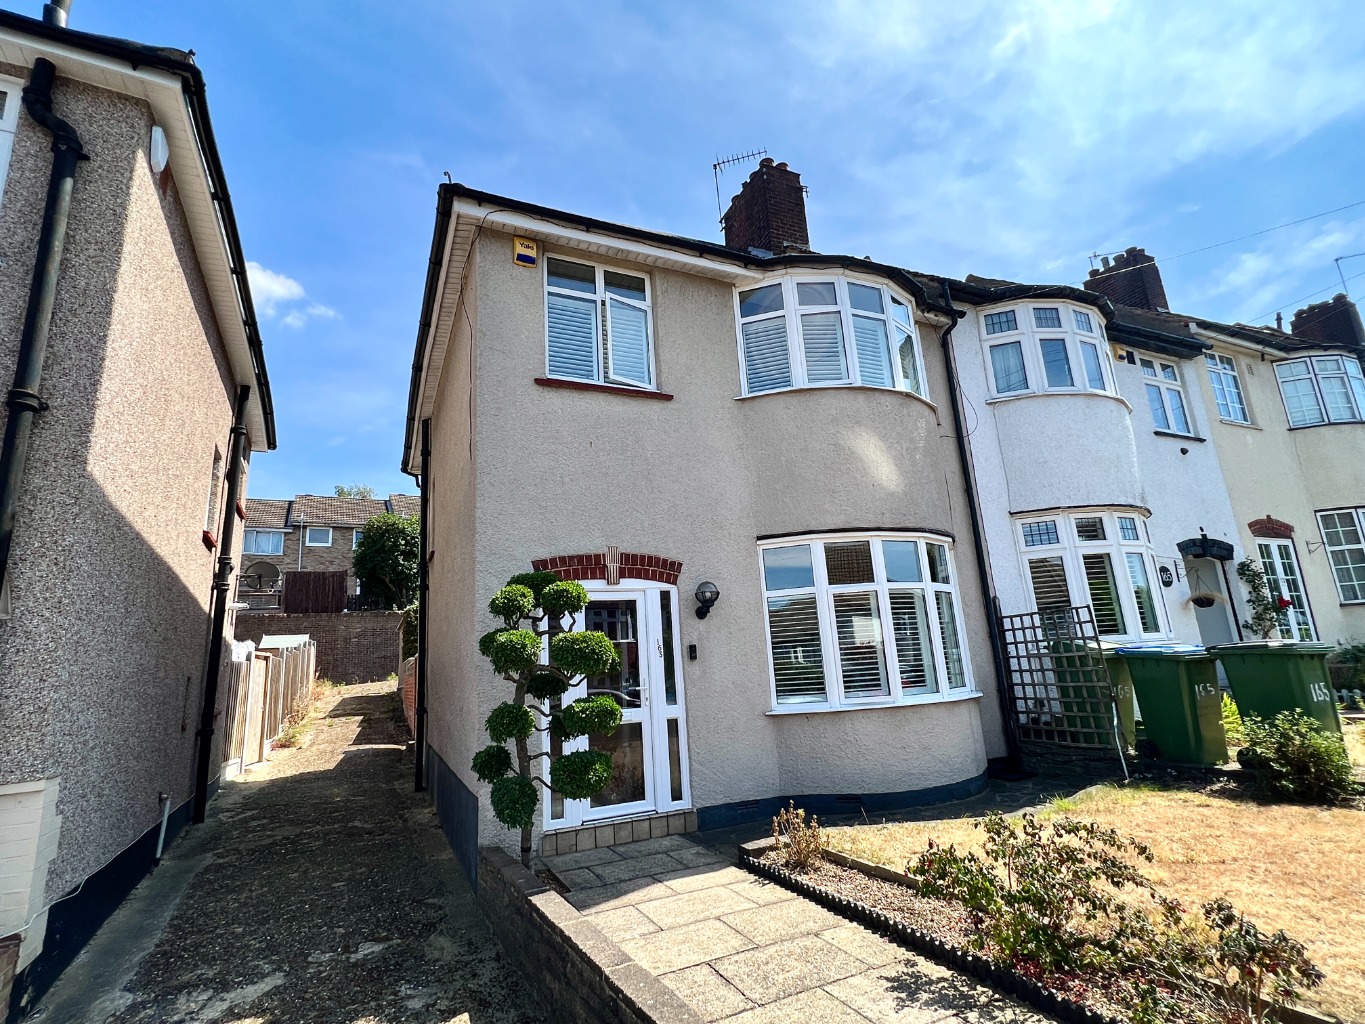 Beaumont Gibbs are delighted to offer this lovely three bedroomed end of terrace house for sale in Moordown, Shooters Hill, SE18. The road is one of the most popular of its kind in the area and comes with the benefit of no forward chain.